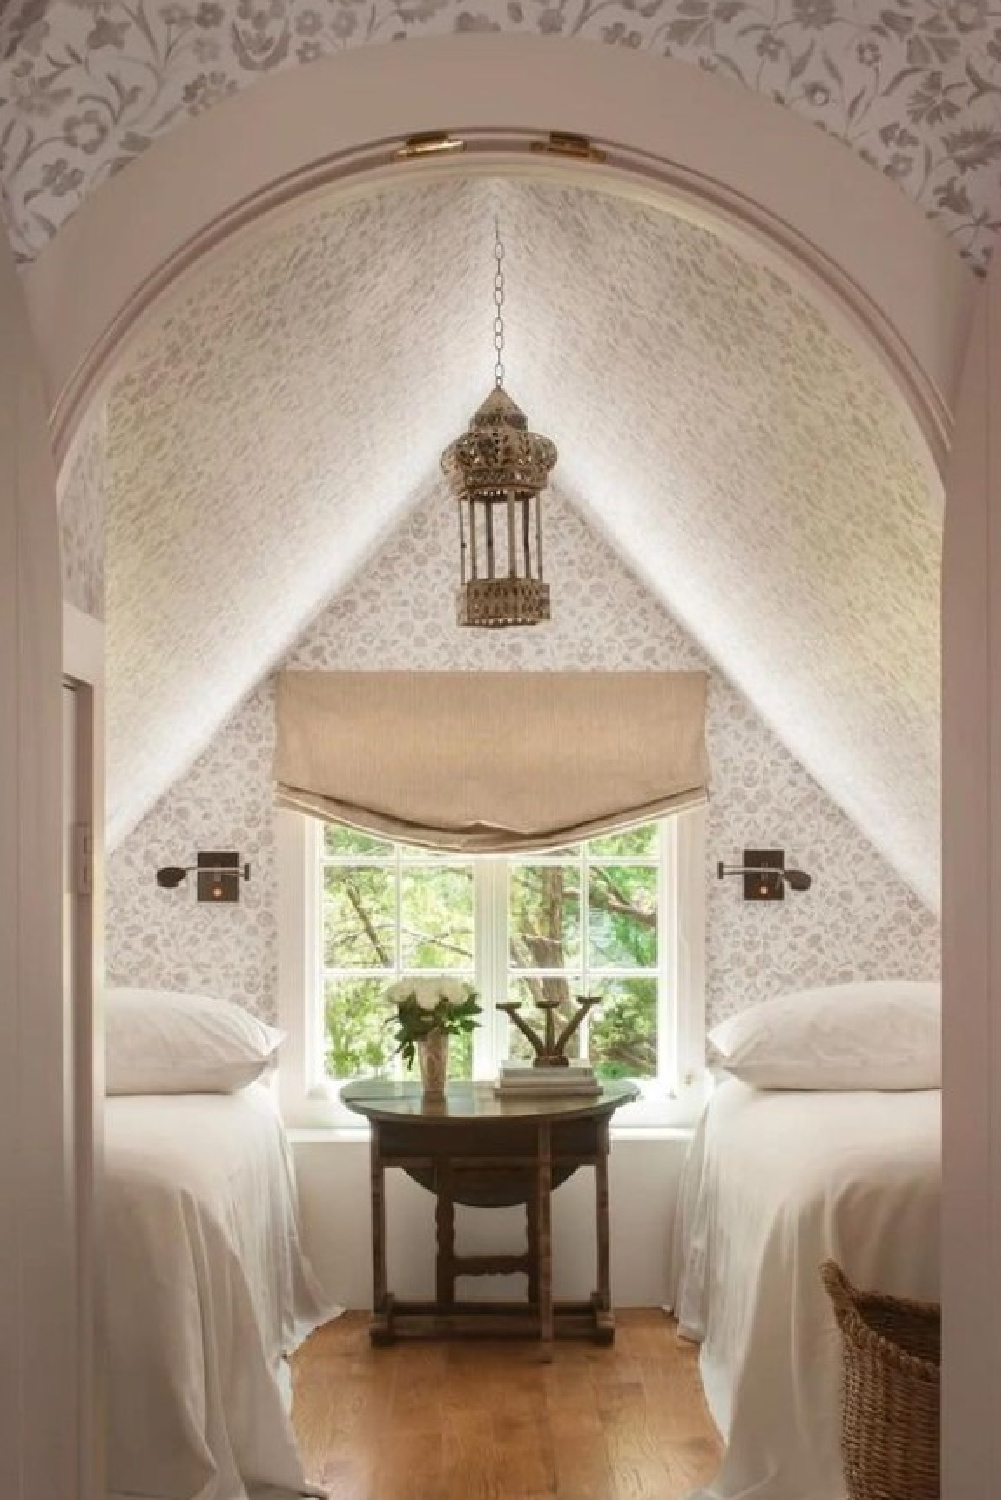 Attic bedroom with arched door. Timeless interior design by Shannon Bowers with nods to European antiques, patina, understated elegance, and sophisticated simplicity. #shannonbowers #timelessinteriors